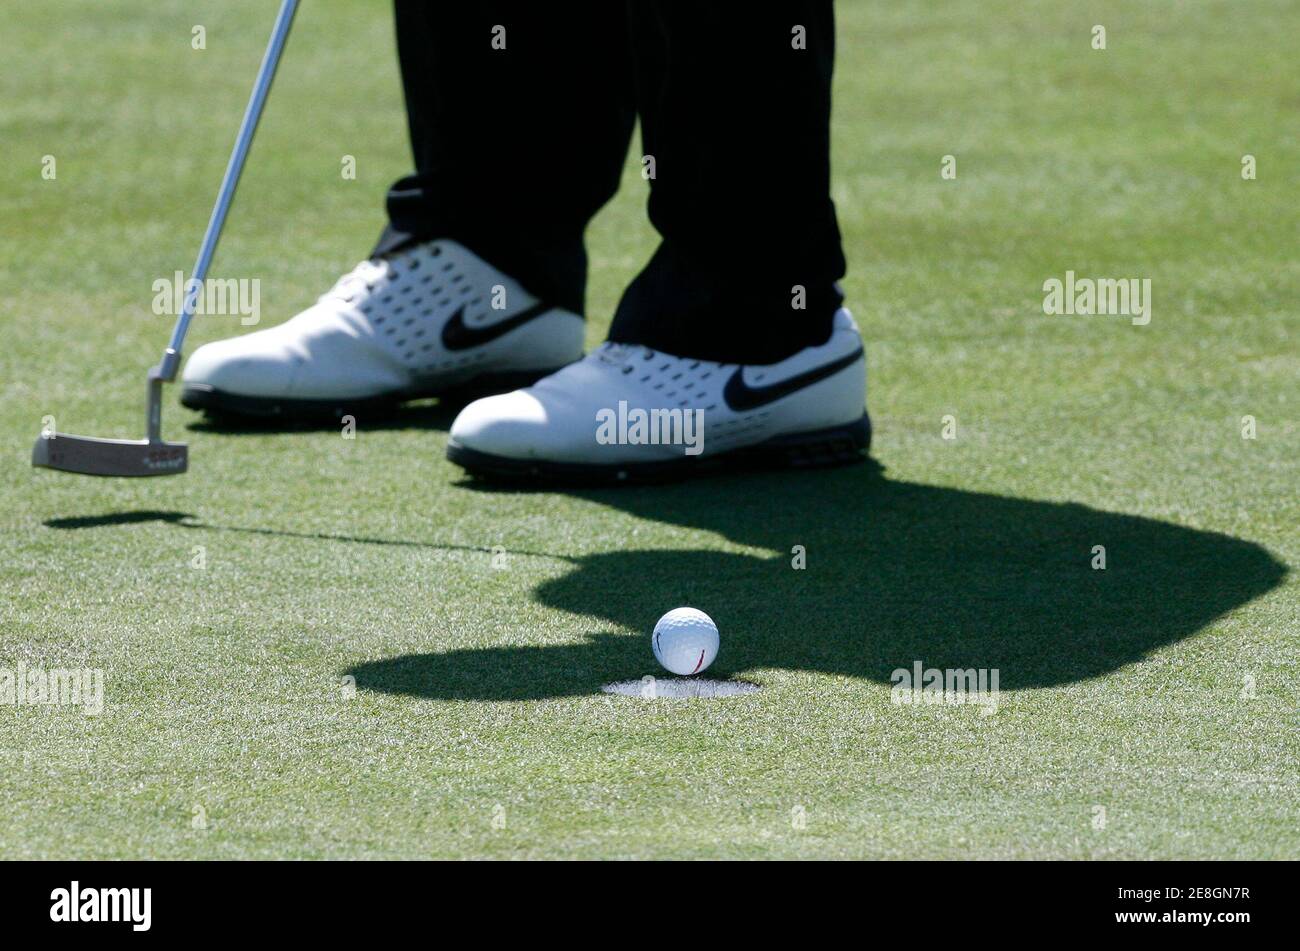 Anthony Kim of the U.S. makes a par putt on the 17th green during the second round of Ballantine's Championship golf tournament at the Pinx Golf Club in Seogwipo on Jeju Island March 14, 2008.  REUTERS/Jo Yong-Hak (SOUTH KOREA) Stock Photo